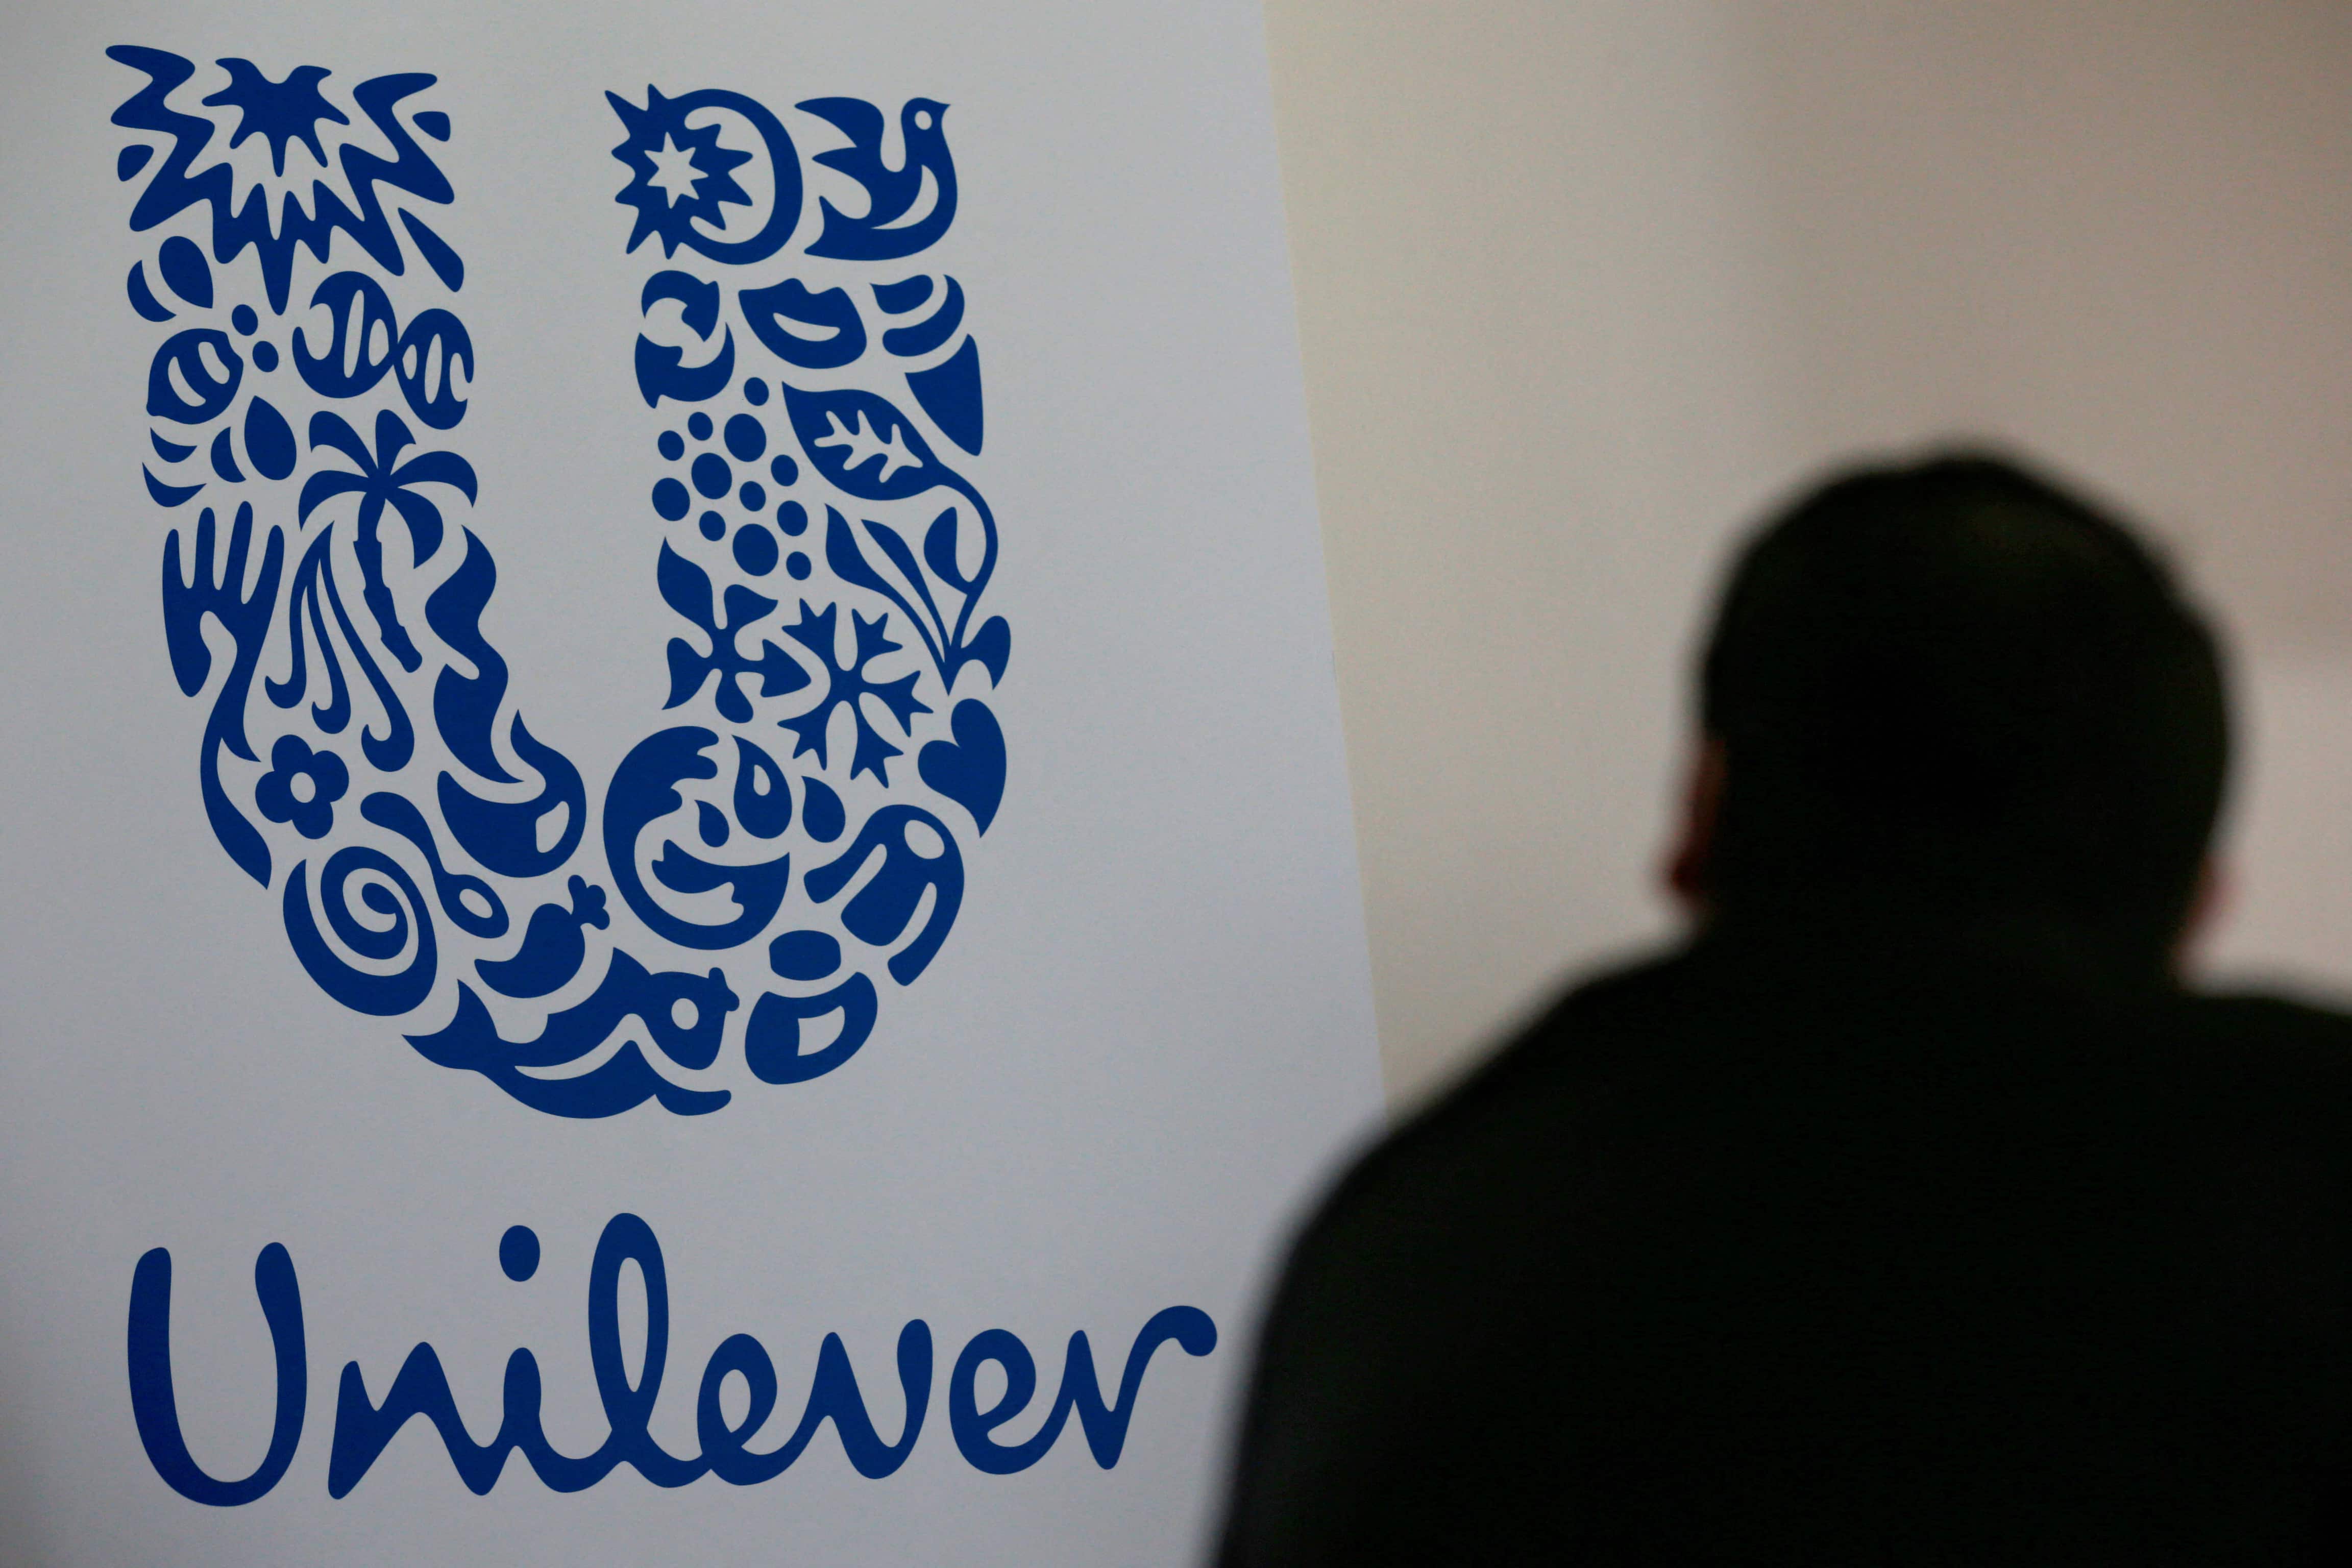 Unilever’s venture capital arm invests in health & wellness startup